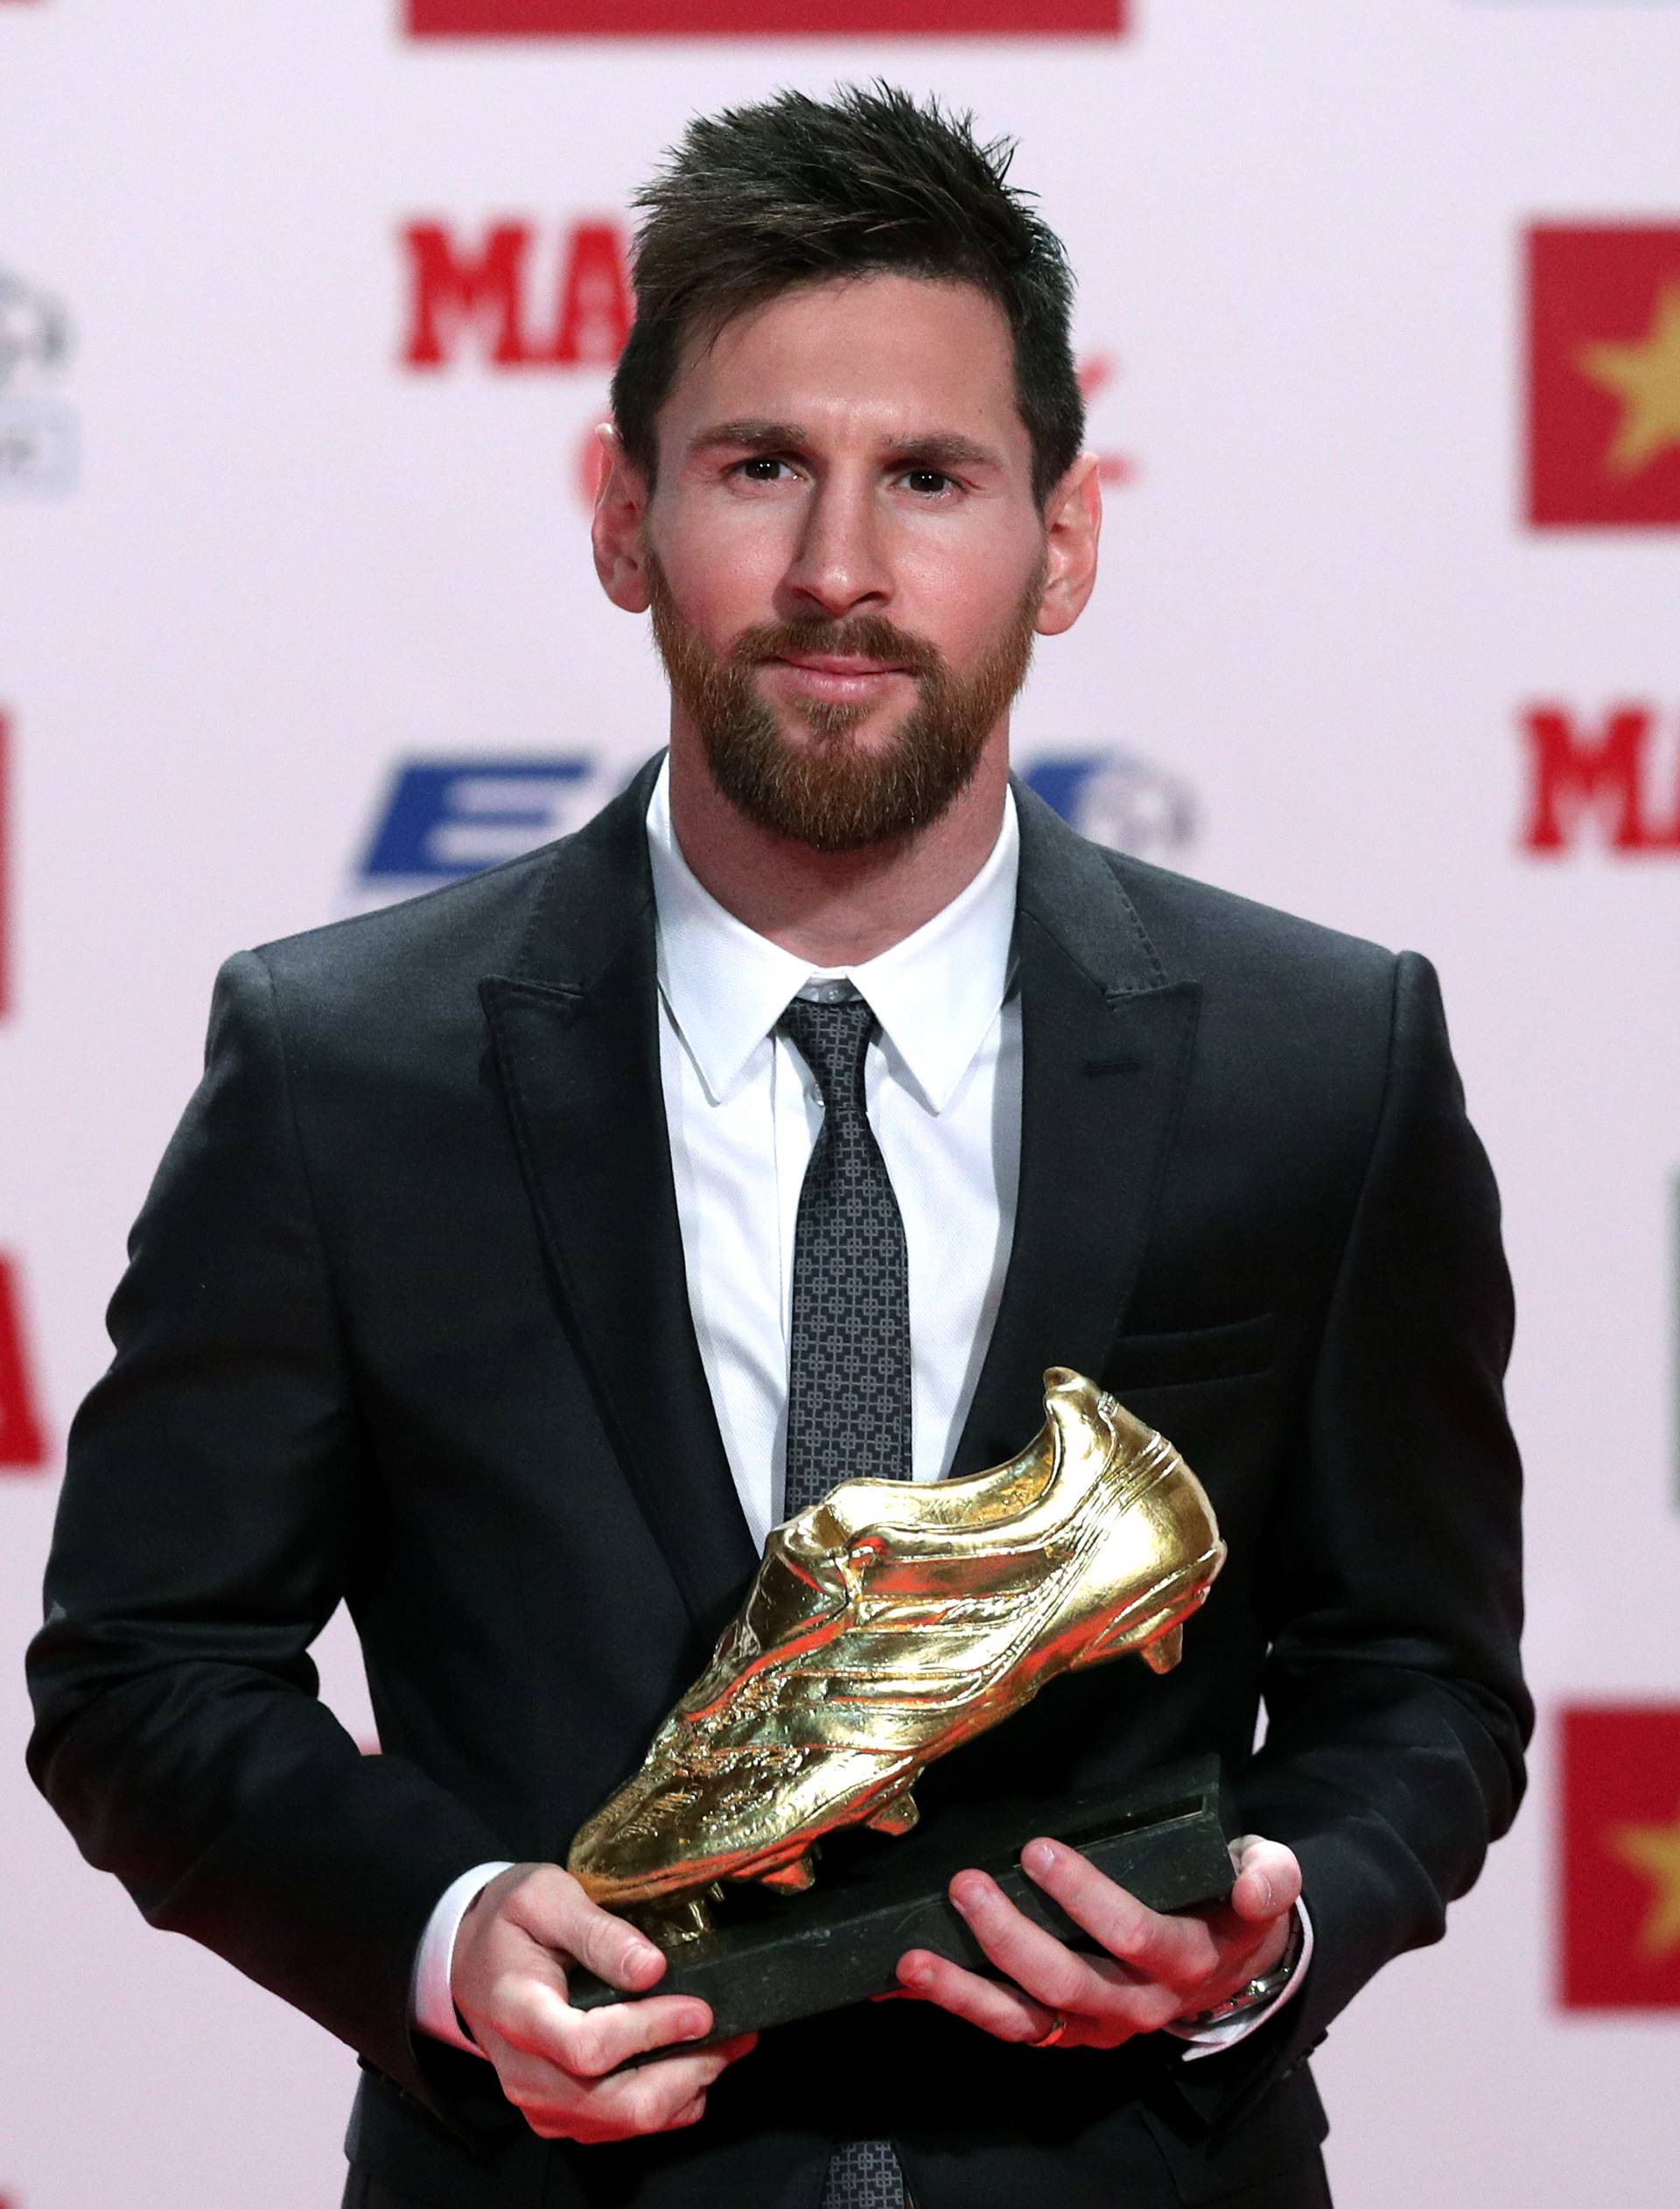 Barcelona's Lionel Messi poses with his Golden Boot trophy during a ceremony in Barcelona